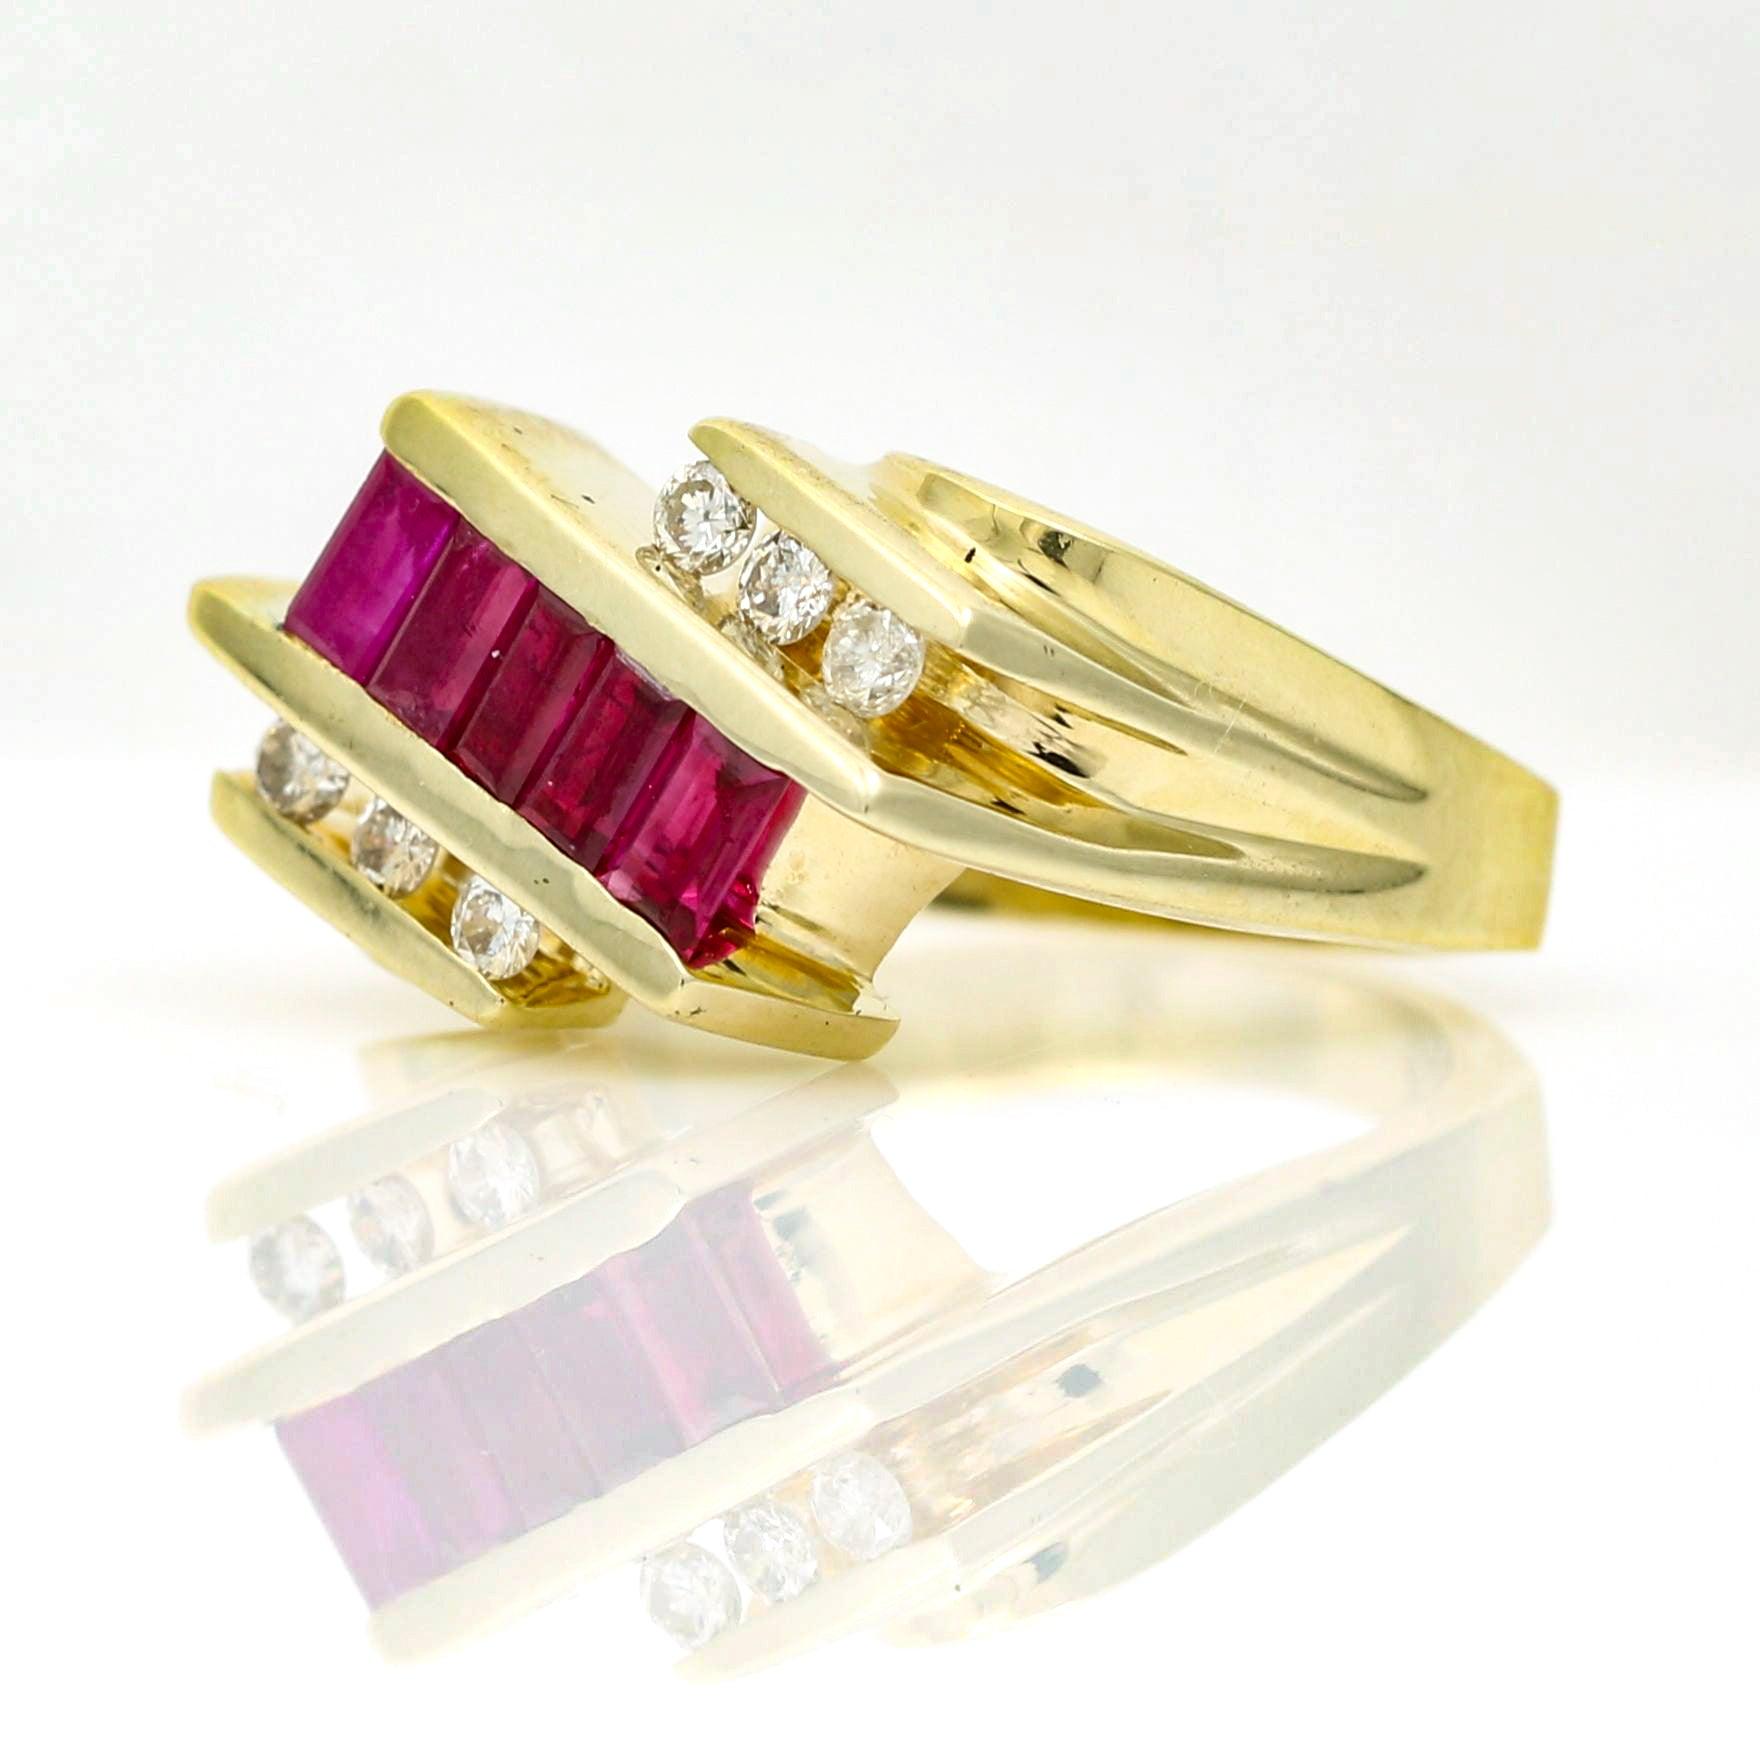 Women's Stylish Retro Band Ring with Rubies and Diamonds in 14k Gold - 31 Jewels Inc.